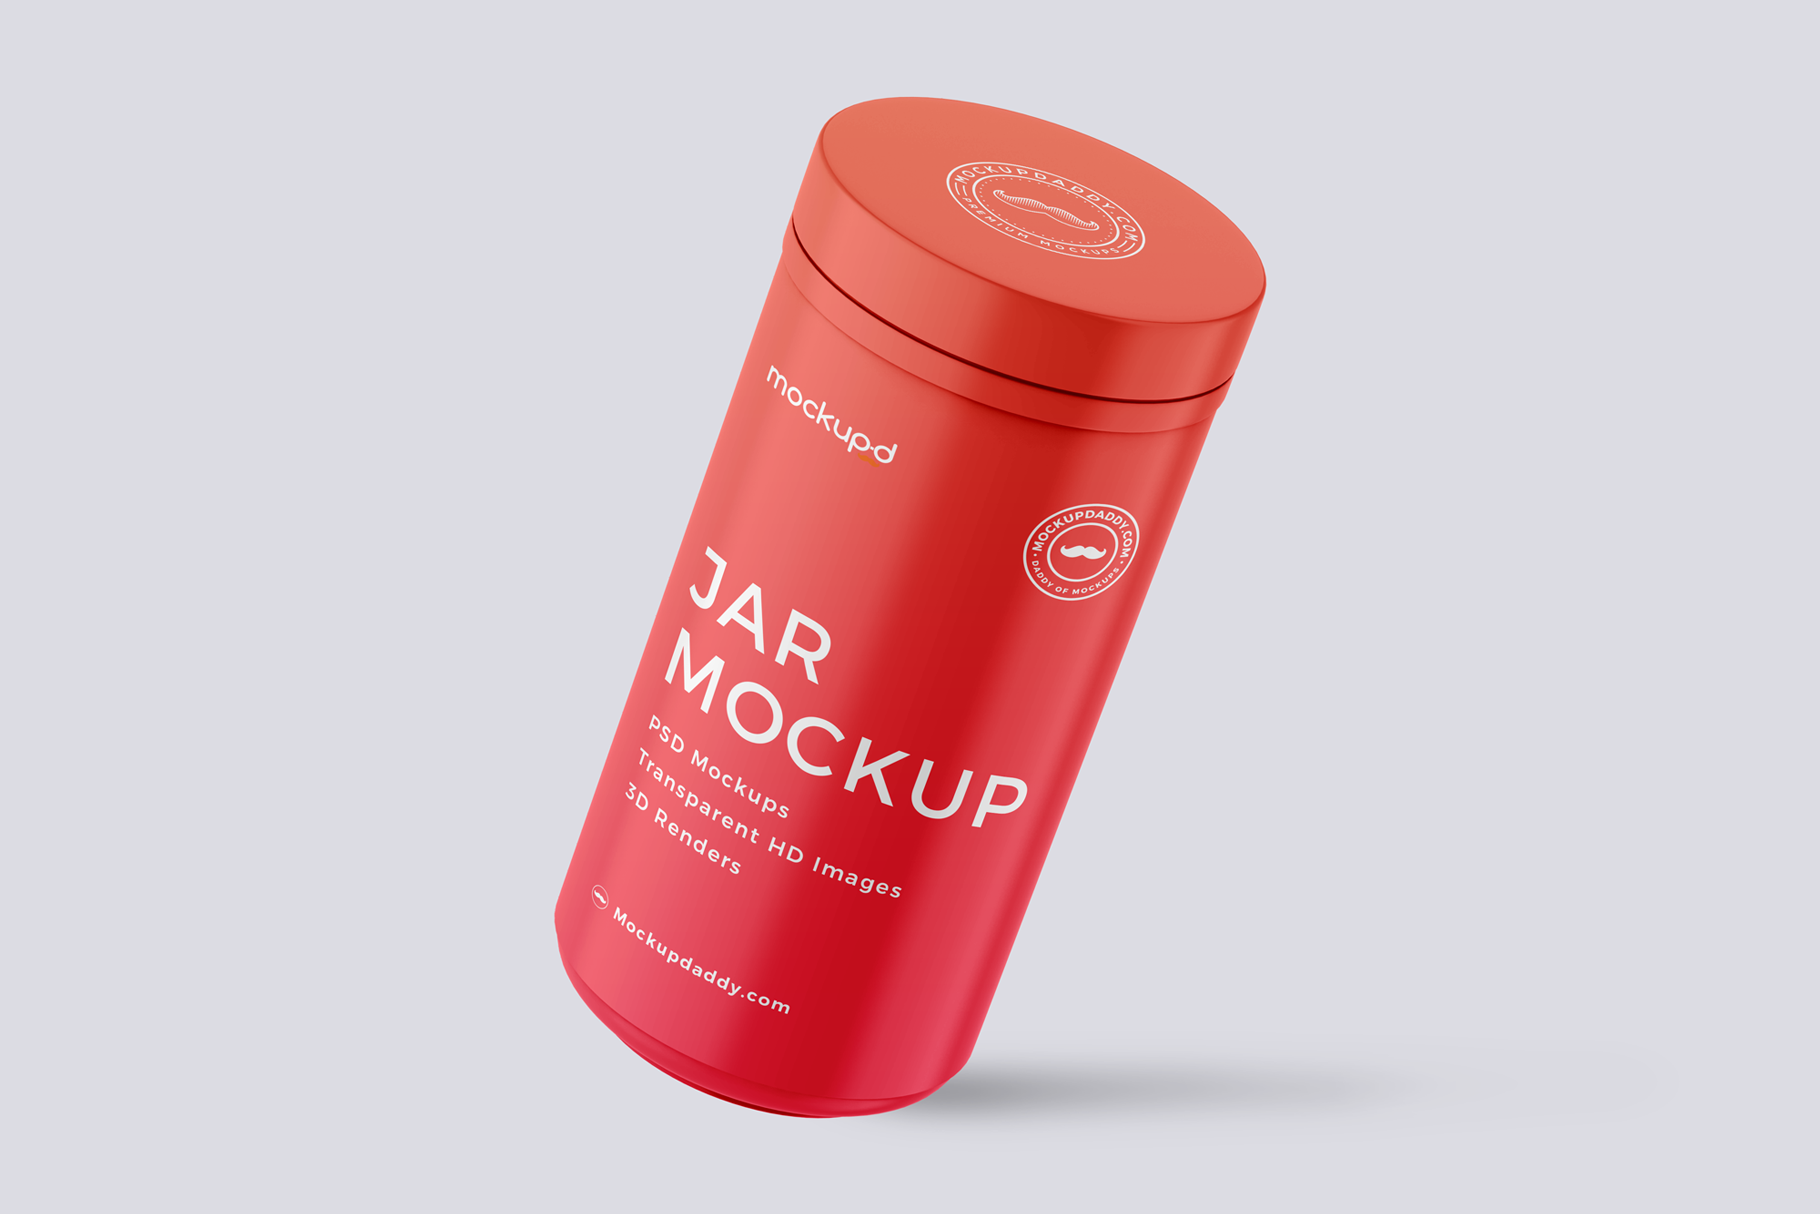 Red 3D Supplement Jar Mockup with red lid.